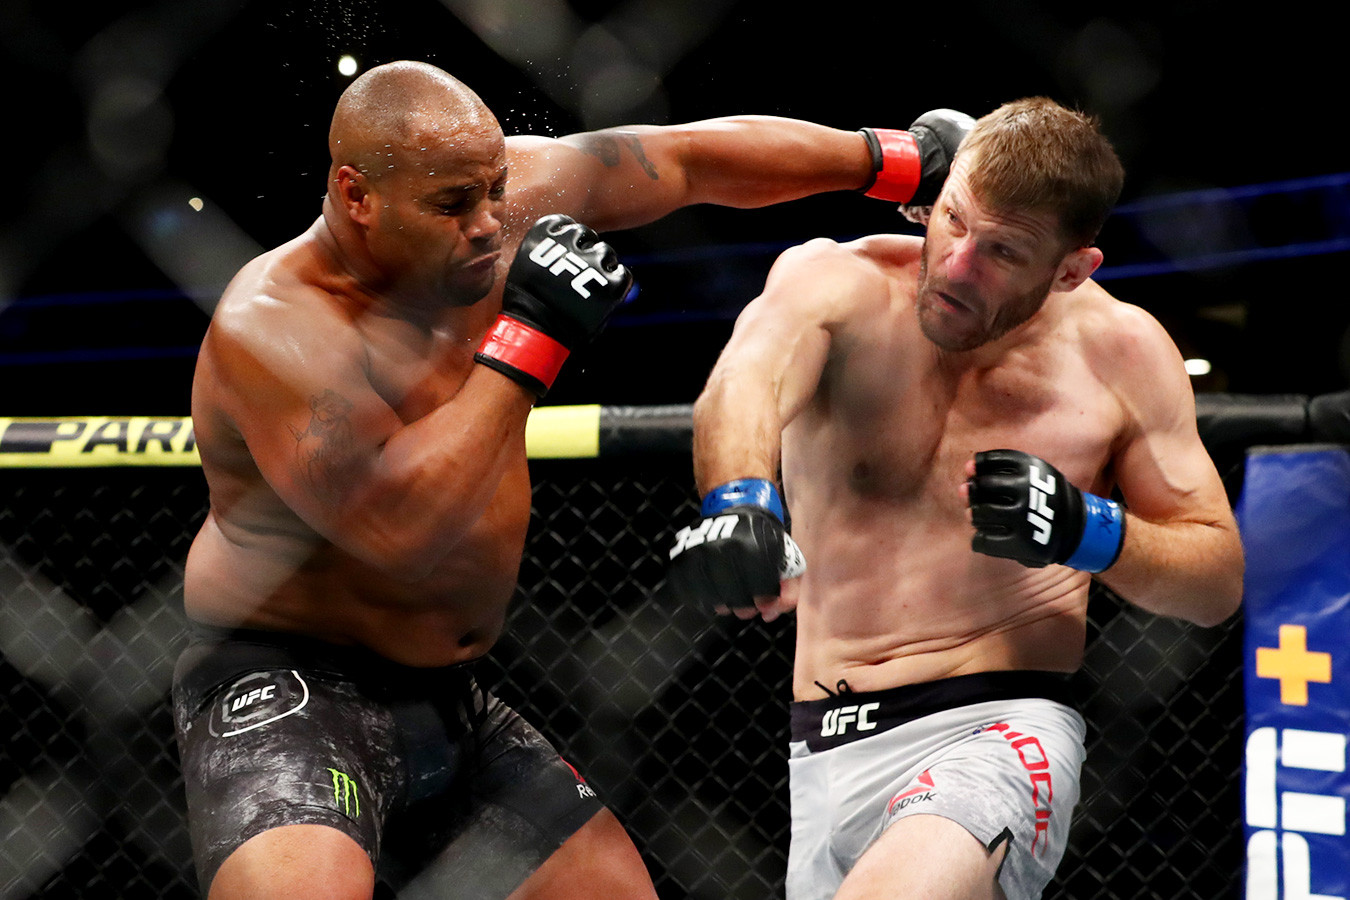 Daniel Cormier assessed Miocic's chances of winning the third fight against Ngannou